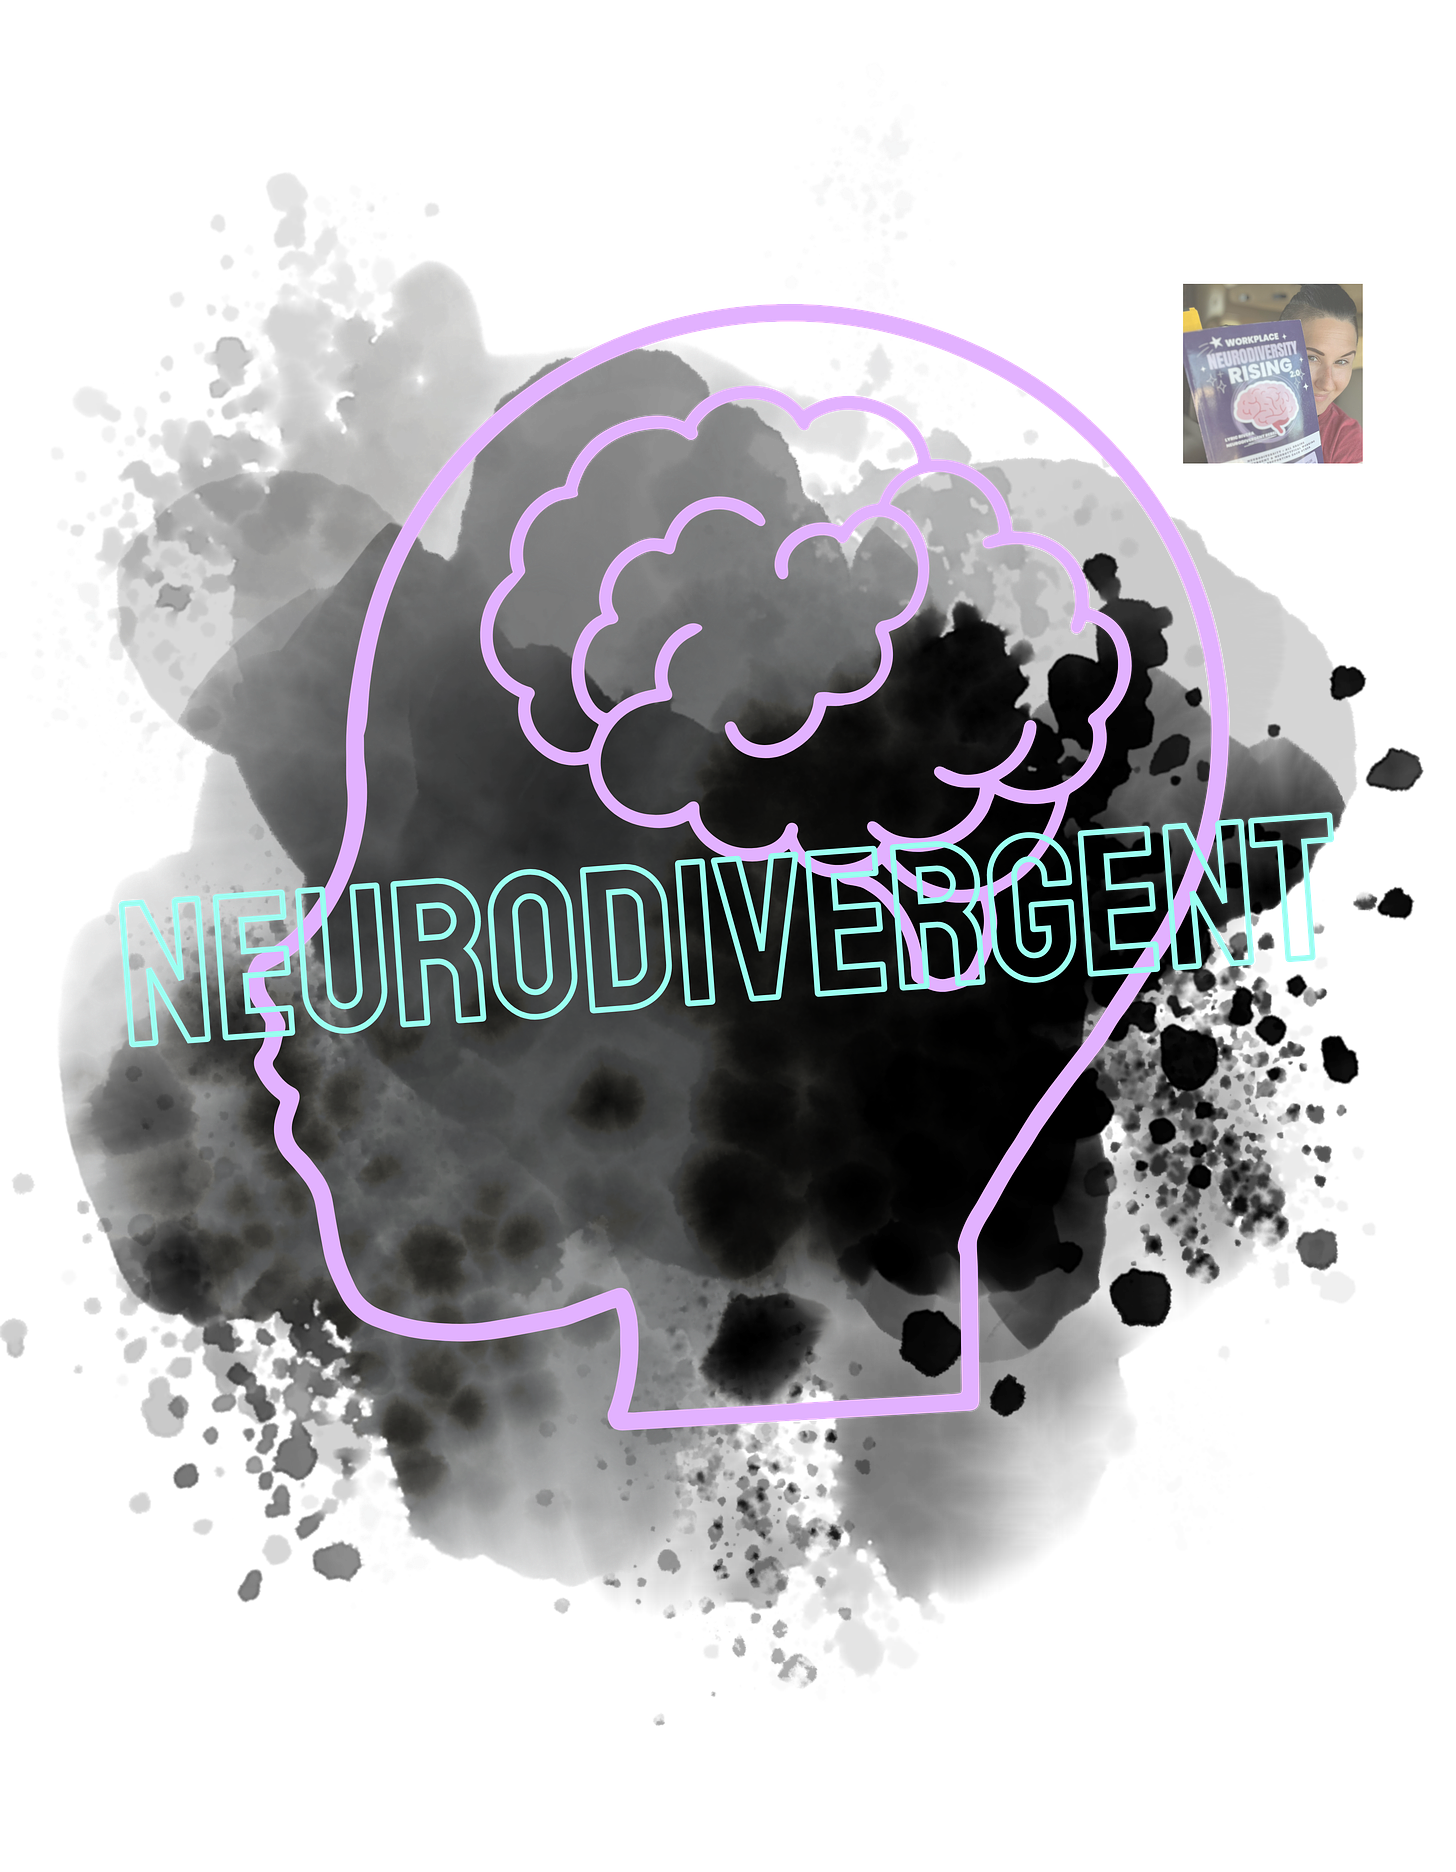 A lavender outline of a human head with a brain inside it appears on a black stain. In the foreground is the word NeuroDivergent diagonally across the image, and in teal block outlined letters.